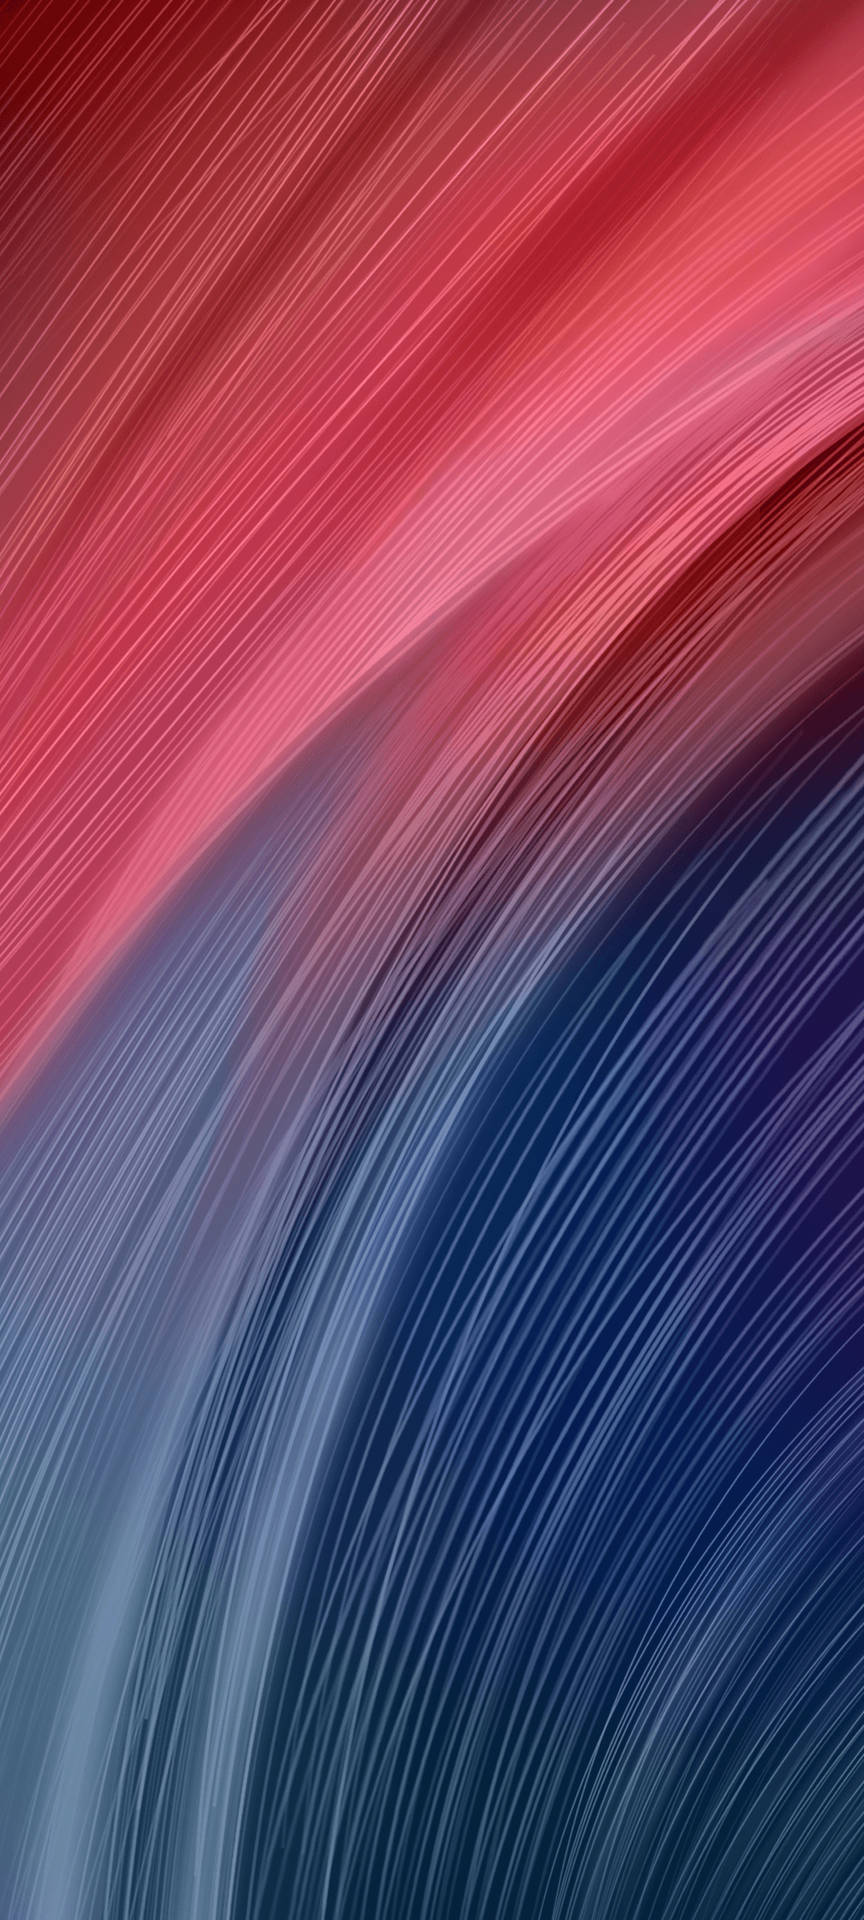 Redmi 9 Pink And Blue Curve Lines Background